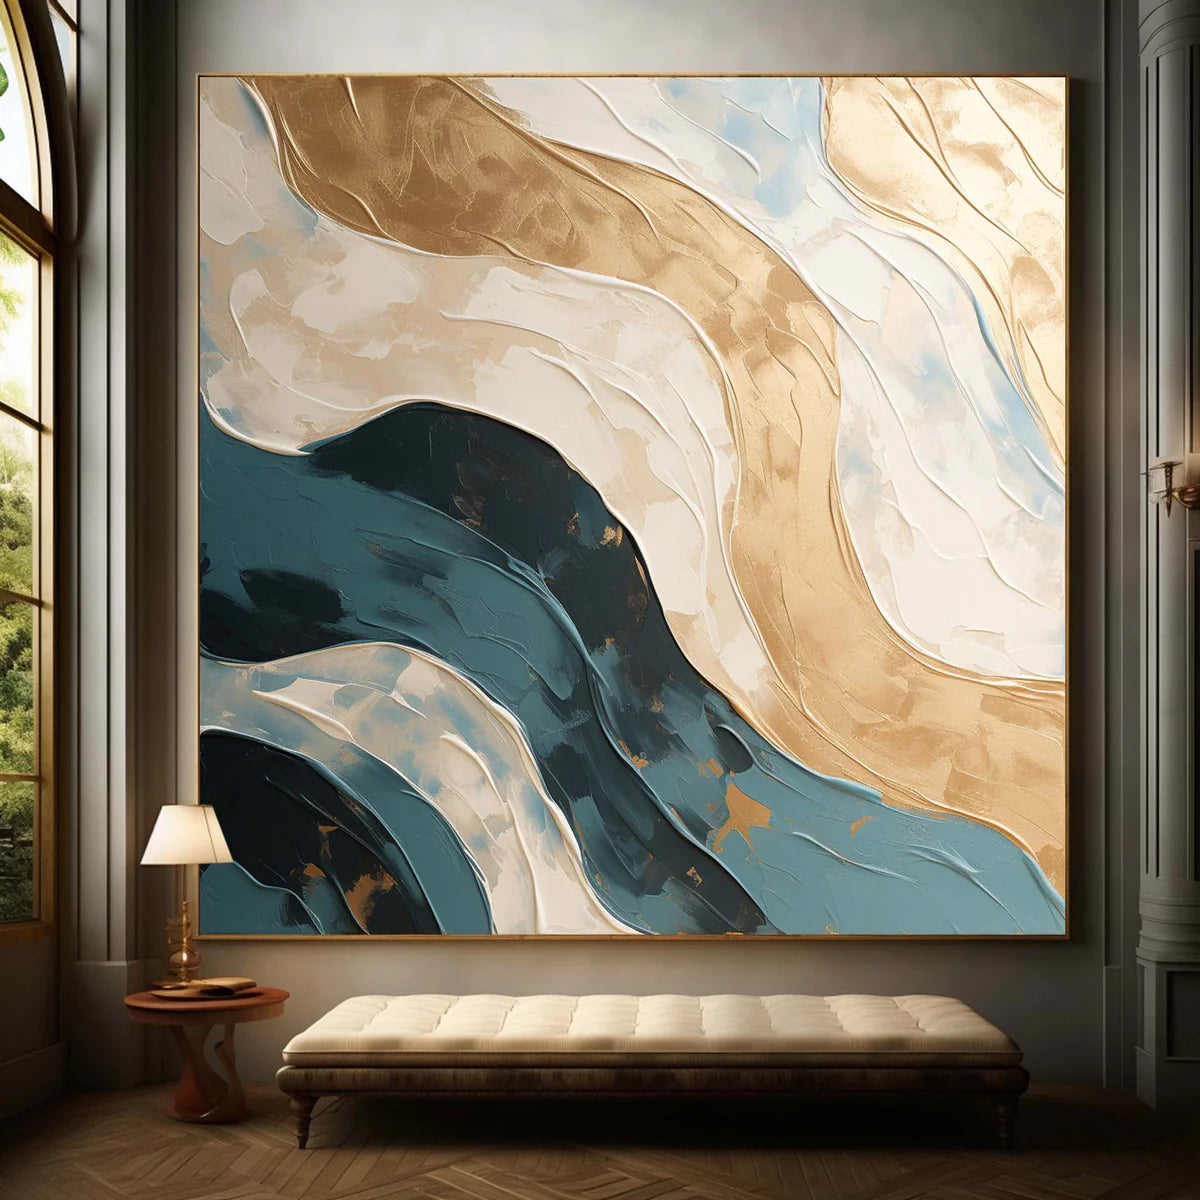 teal-gold-ivory-blue-square-abstract-modern-painting-waves-theurbannarrative